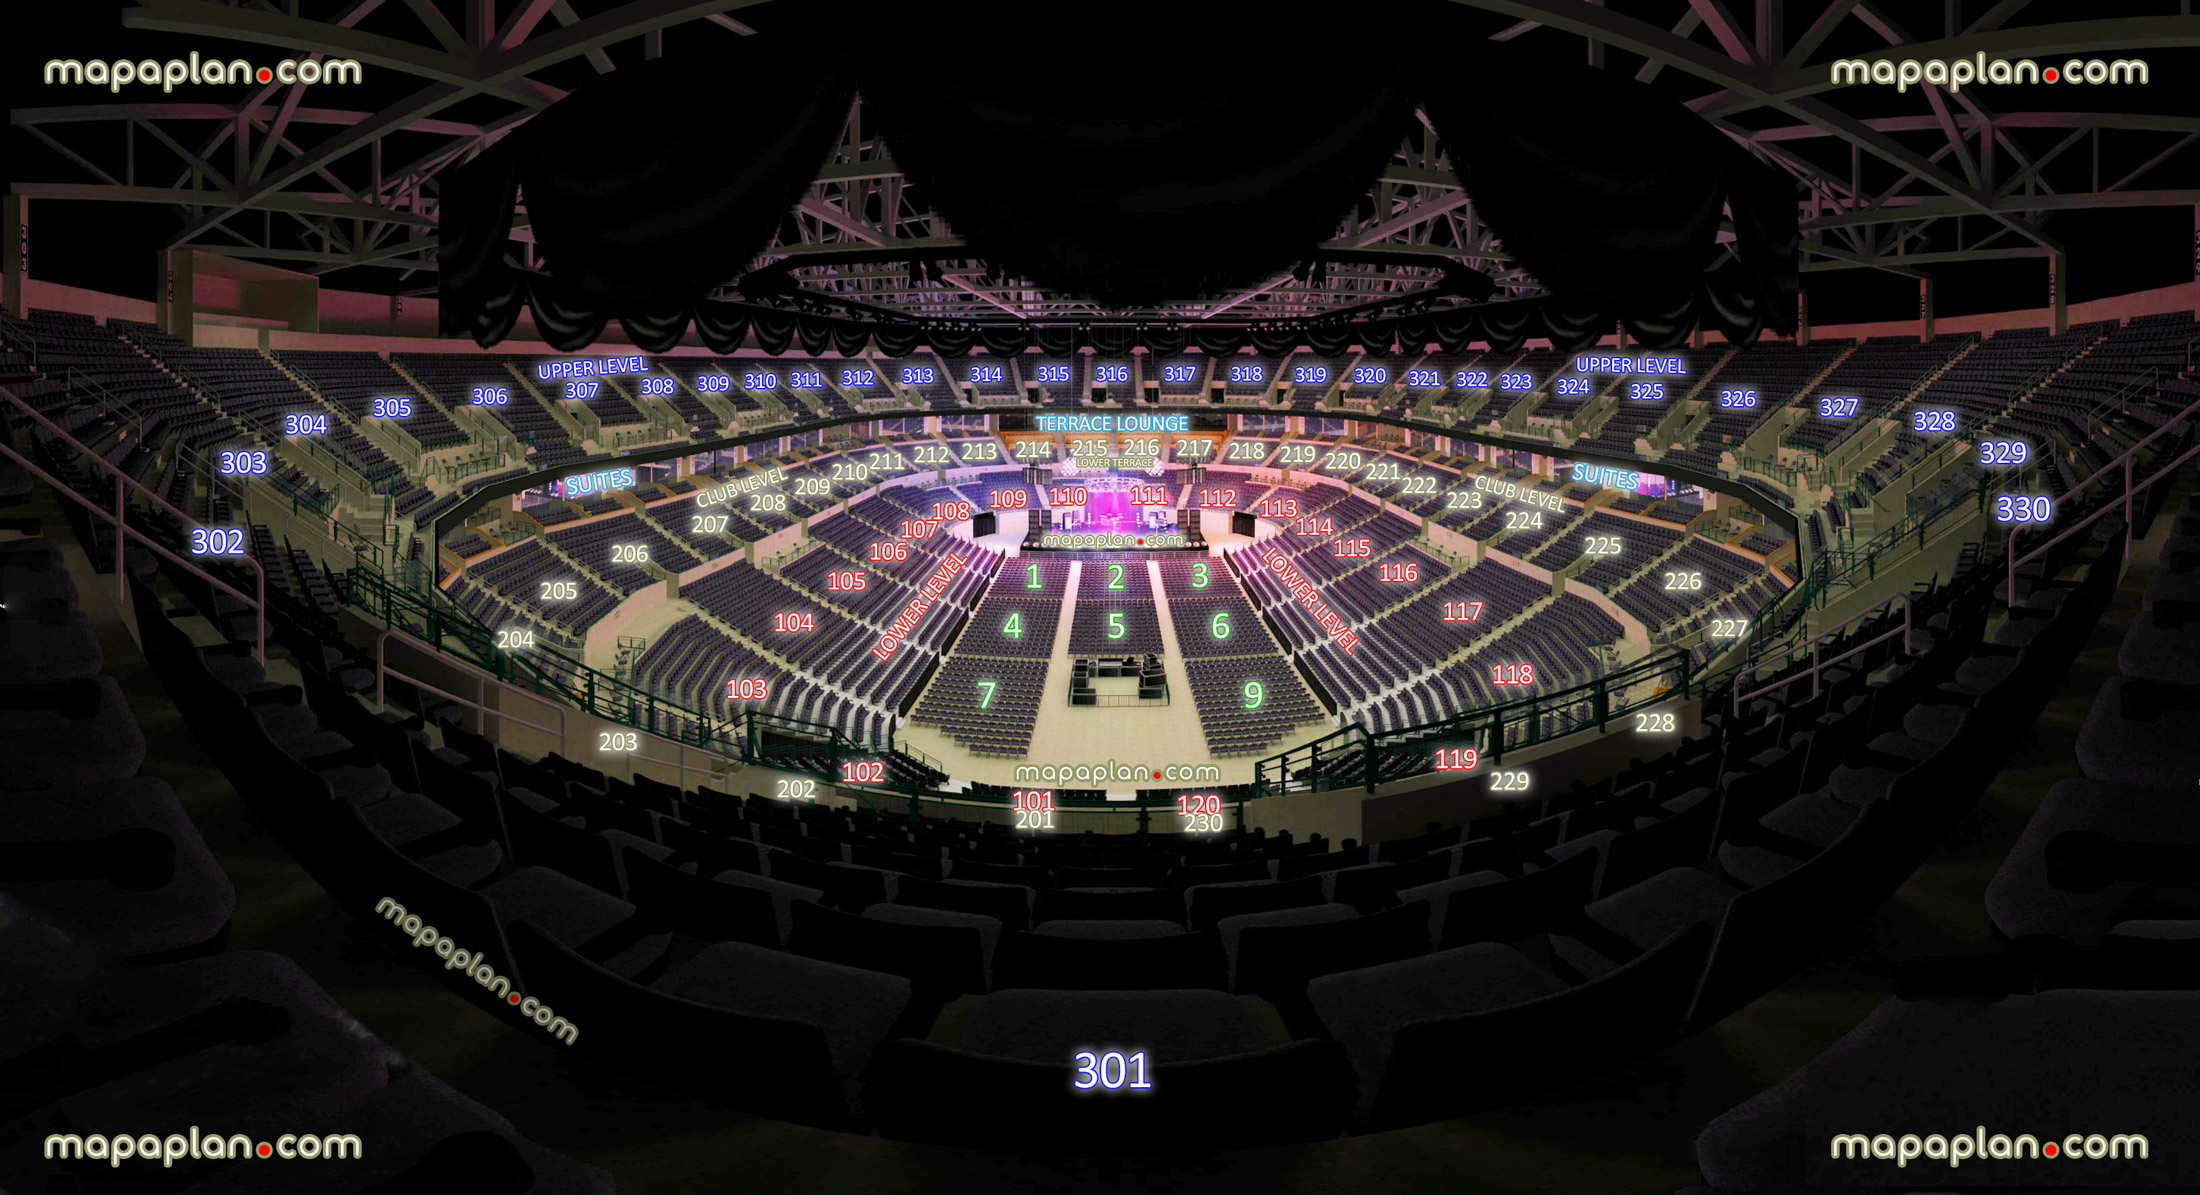 view section 301 row m seat 8 virtual venue 3d interactive inside stage review tour concert picture center floor lower club upper loud city level suites terrace lounge Oklahoma City Paycom Center Arena seating chart